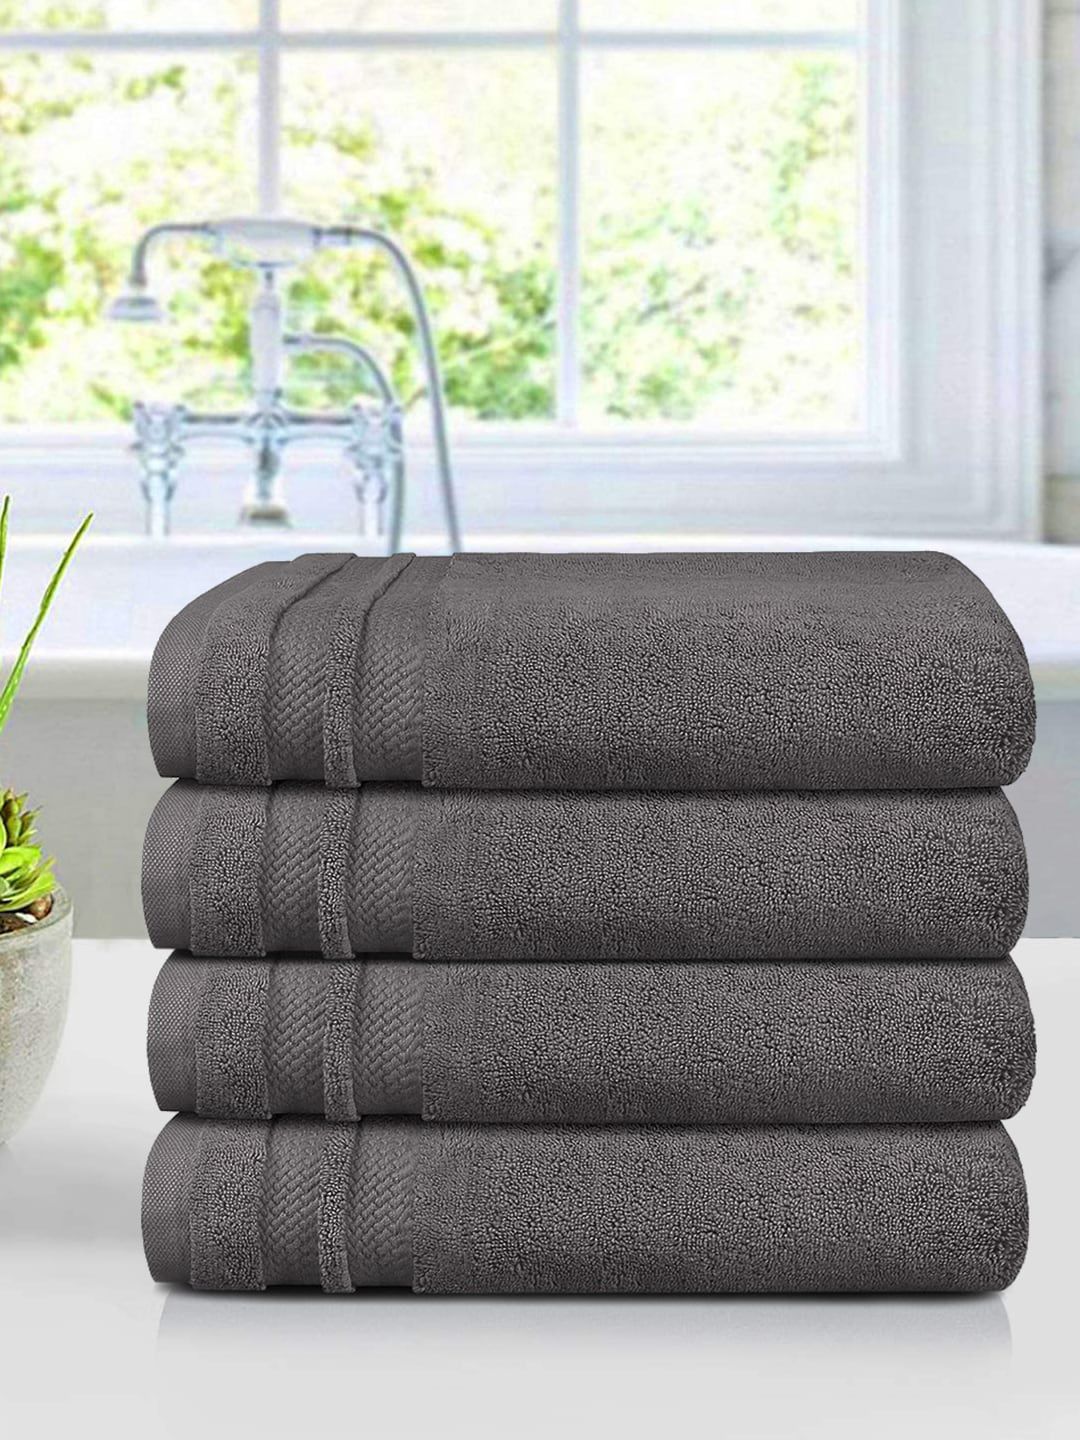 Trident Charcoal Set of 4 Solid Hand Towel Price in India